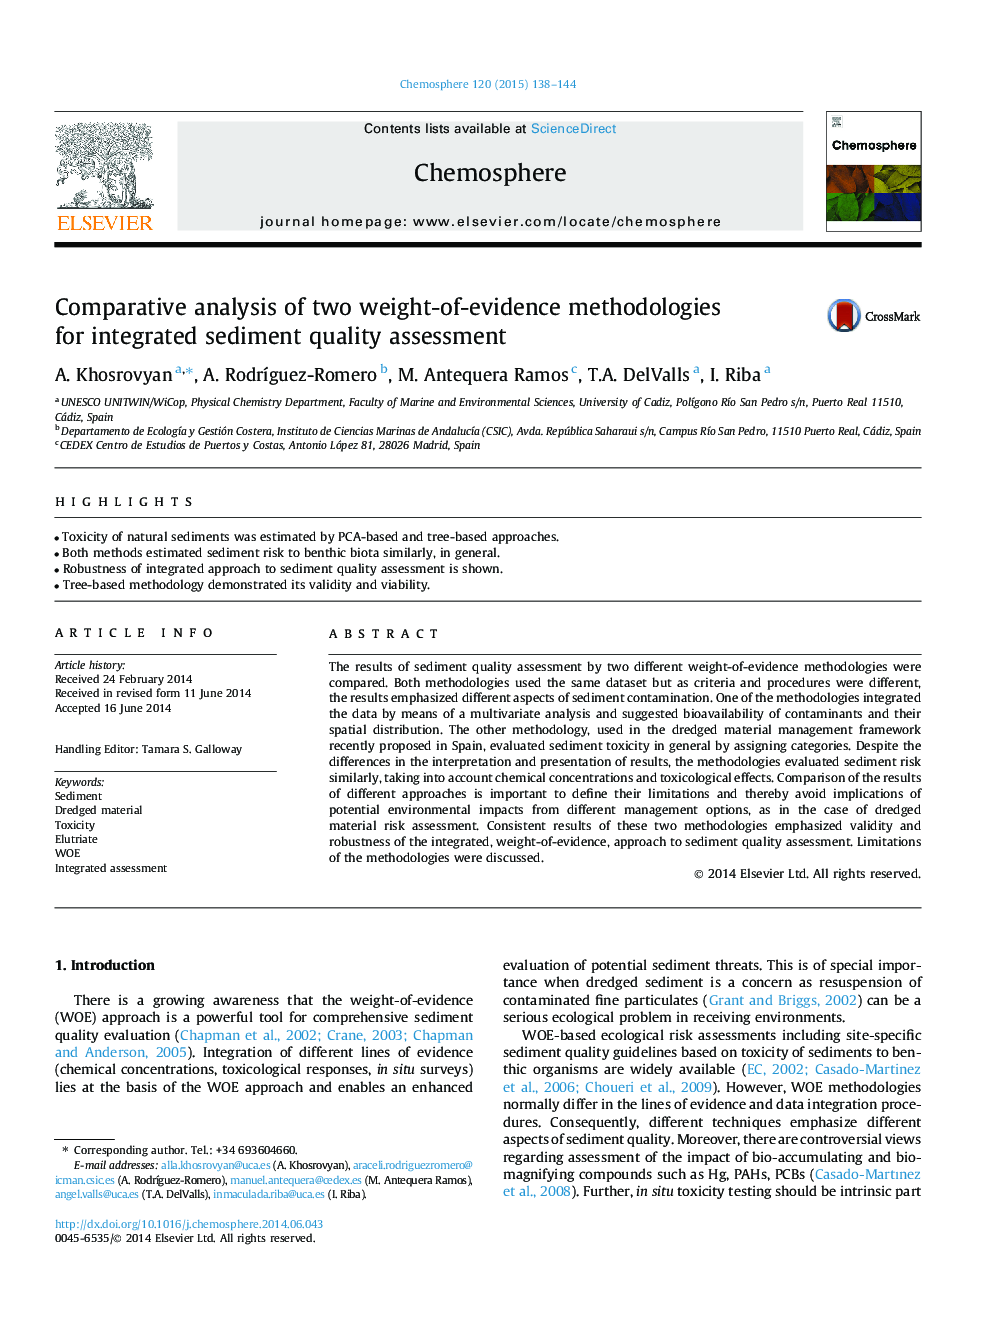 Comparative analysis of two weight-of-evidence methodologies for integrated sediment quality assessment